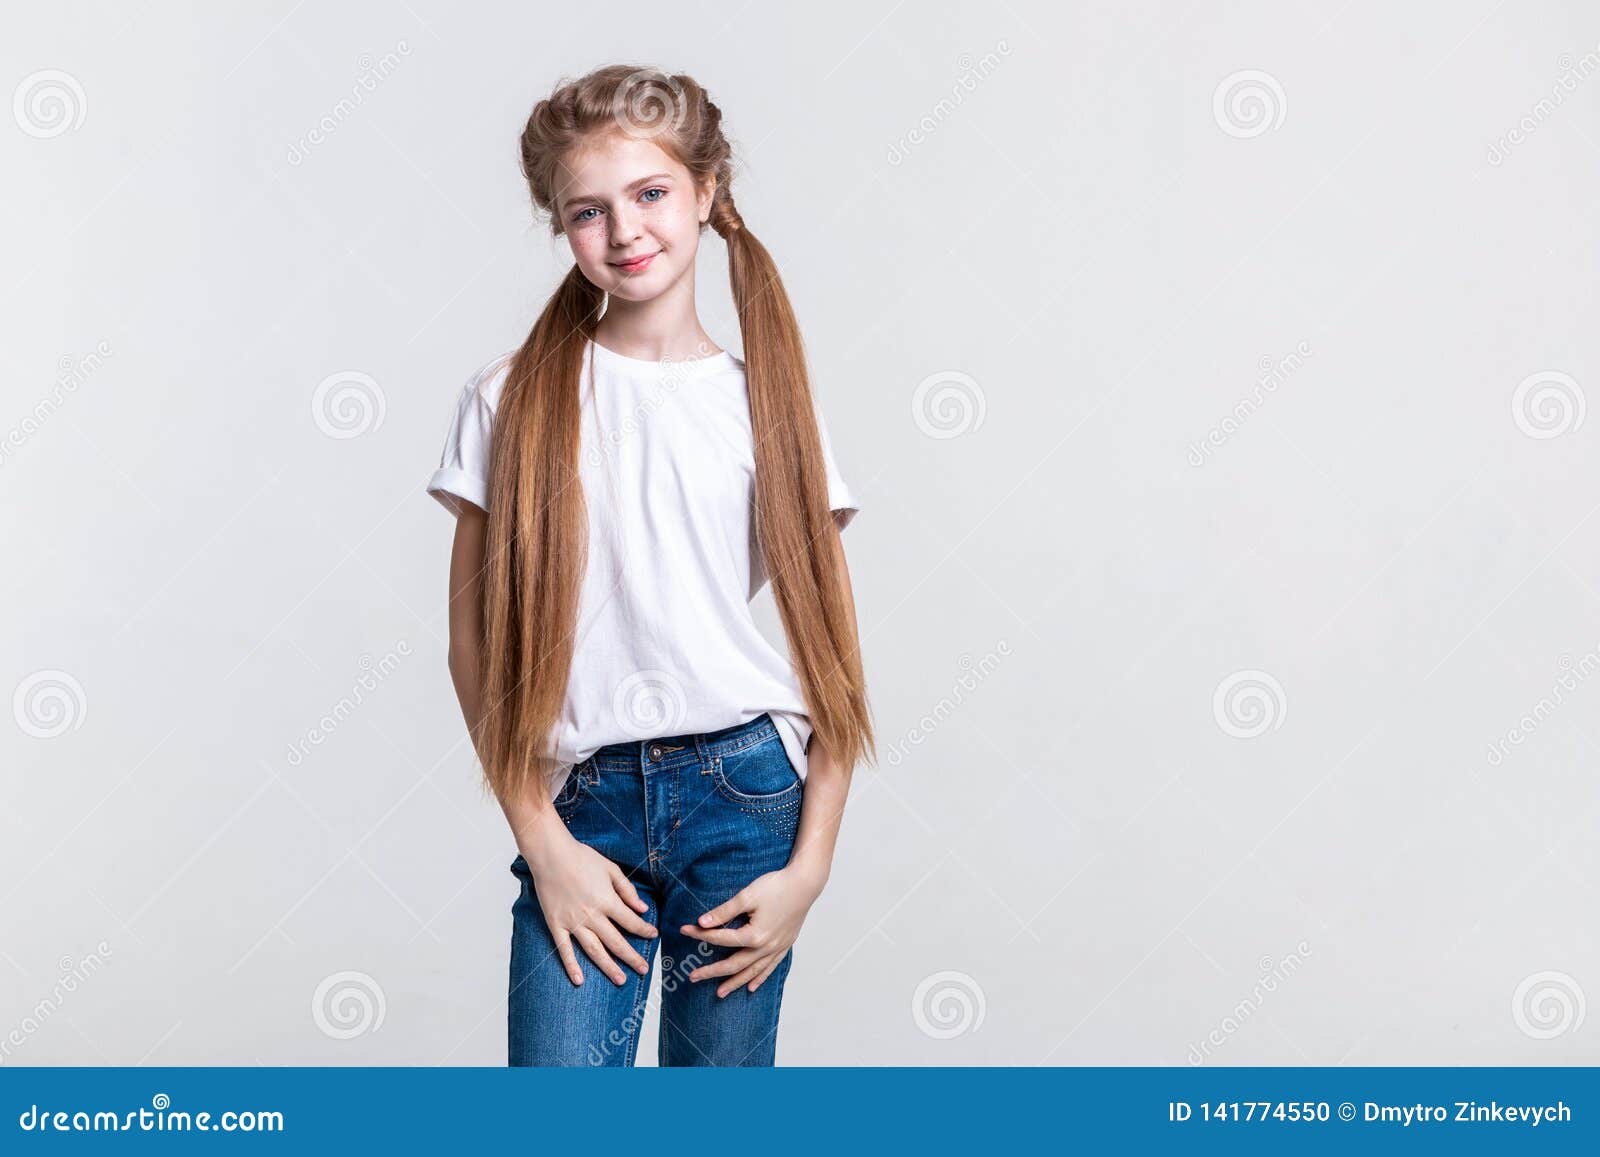 Pleasant Calm Girl Lightly Smiling while Presenting Her Extra-long Hair  Stock Photo - Image of appealing, positive: 141774550